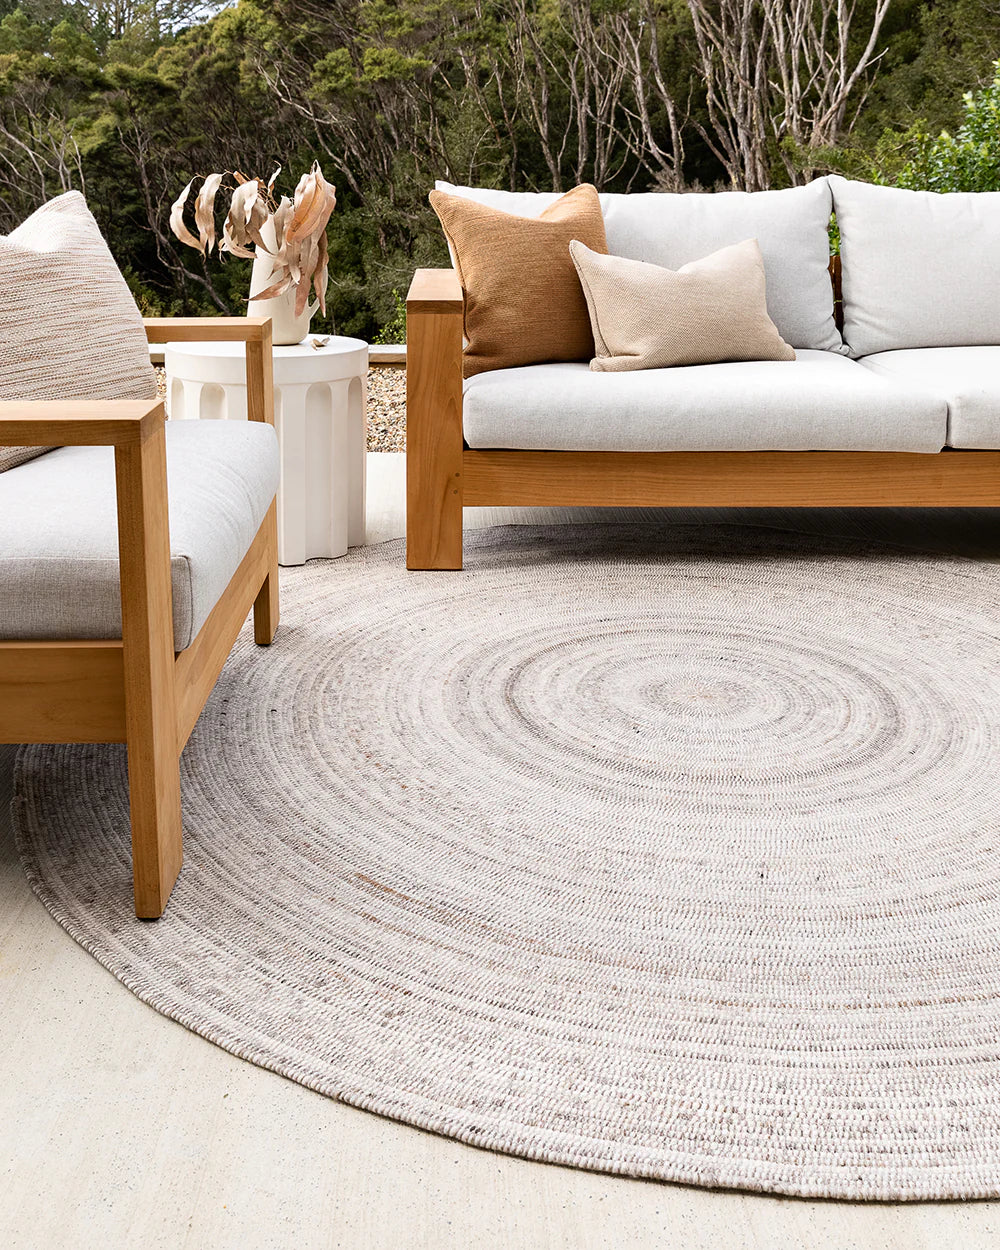 Palm Cove Sand Outdoor PET Rug from Baya Furtex Stockist Make Your House A Home, Furniture Store Bendigo. Free Australia Wide Delivery.